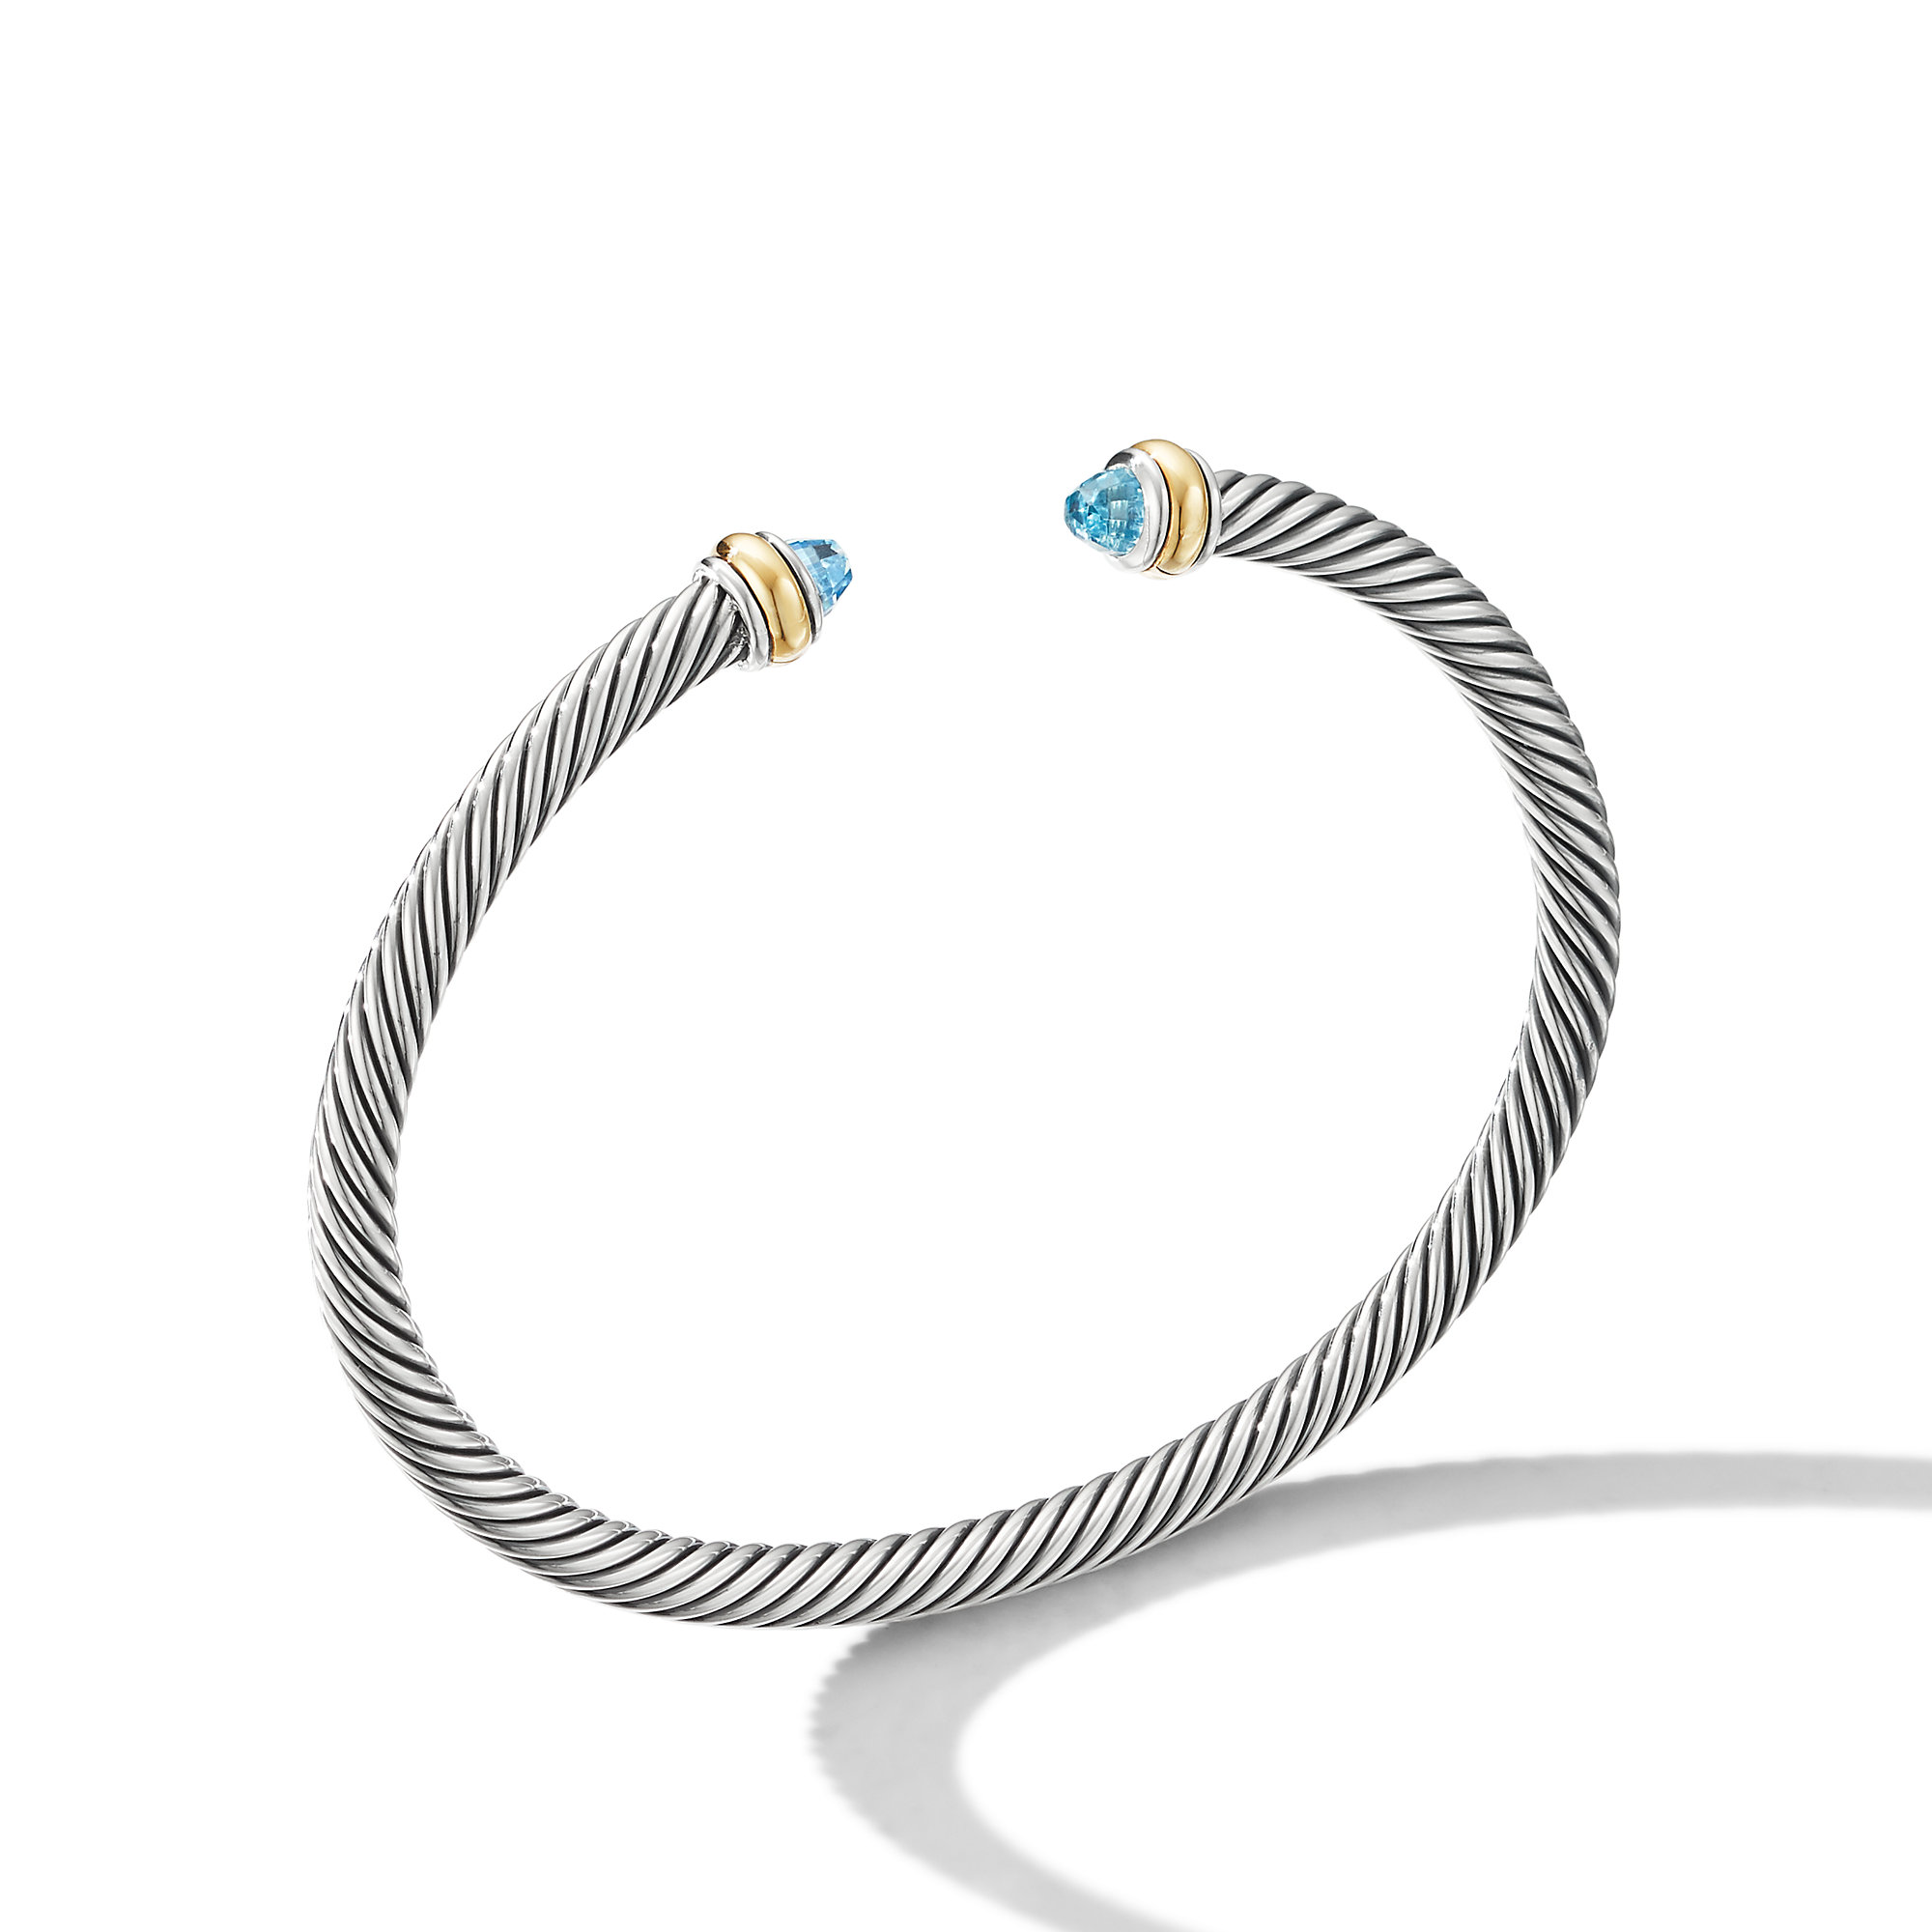 Cable Classics Bracelet in Sterling Silver with Blue Topaz and 18K Yellow Gold